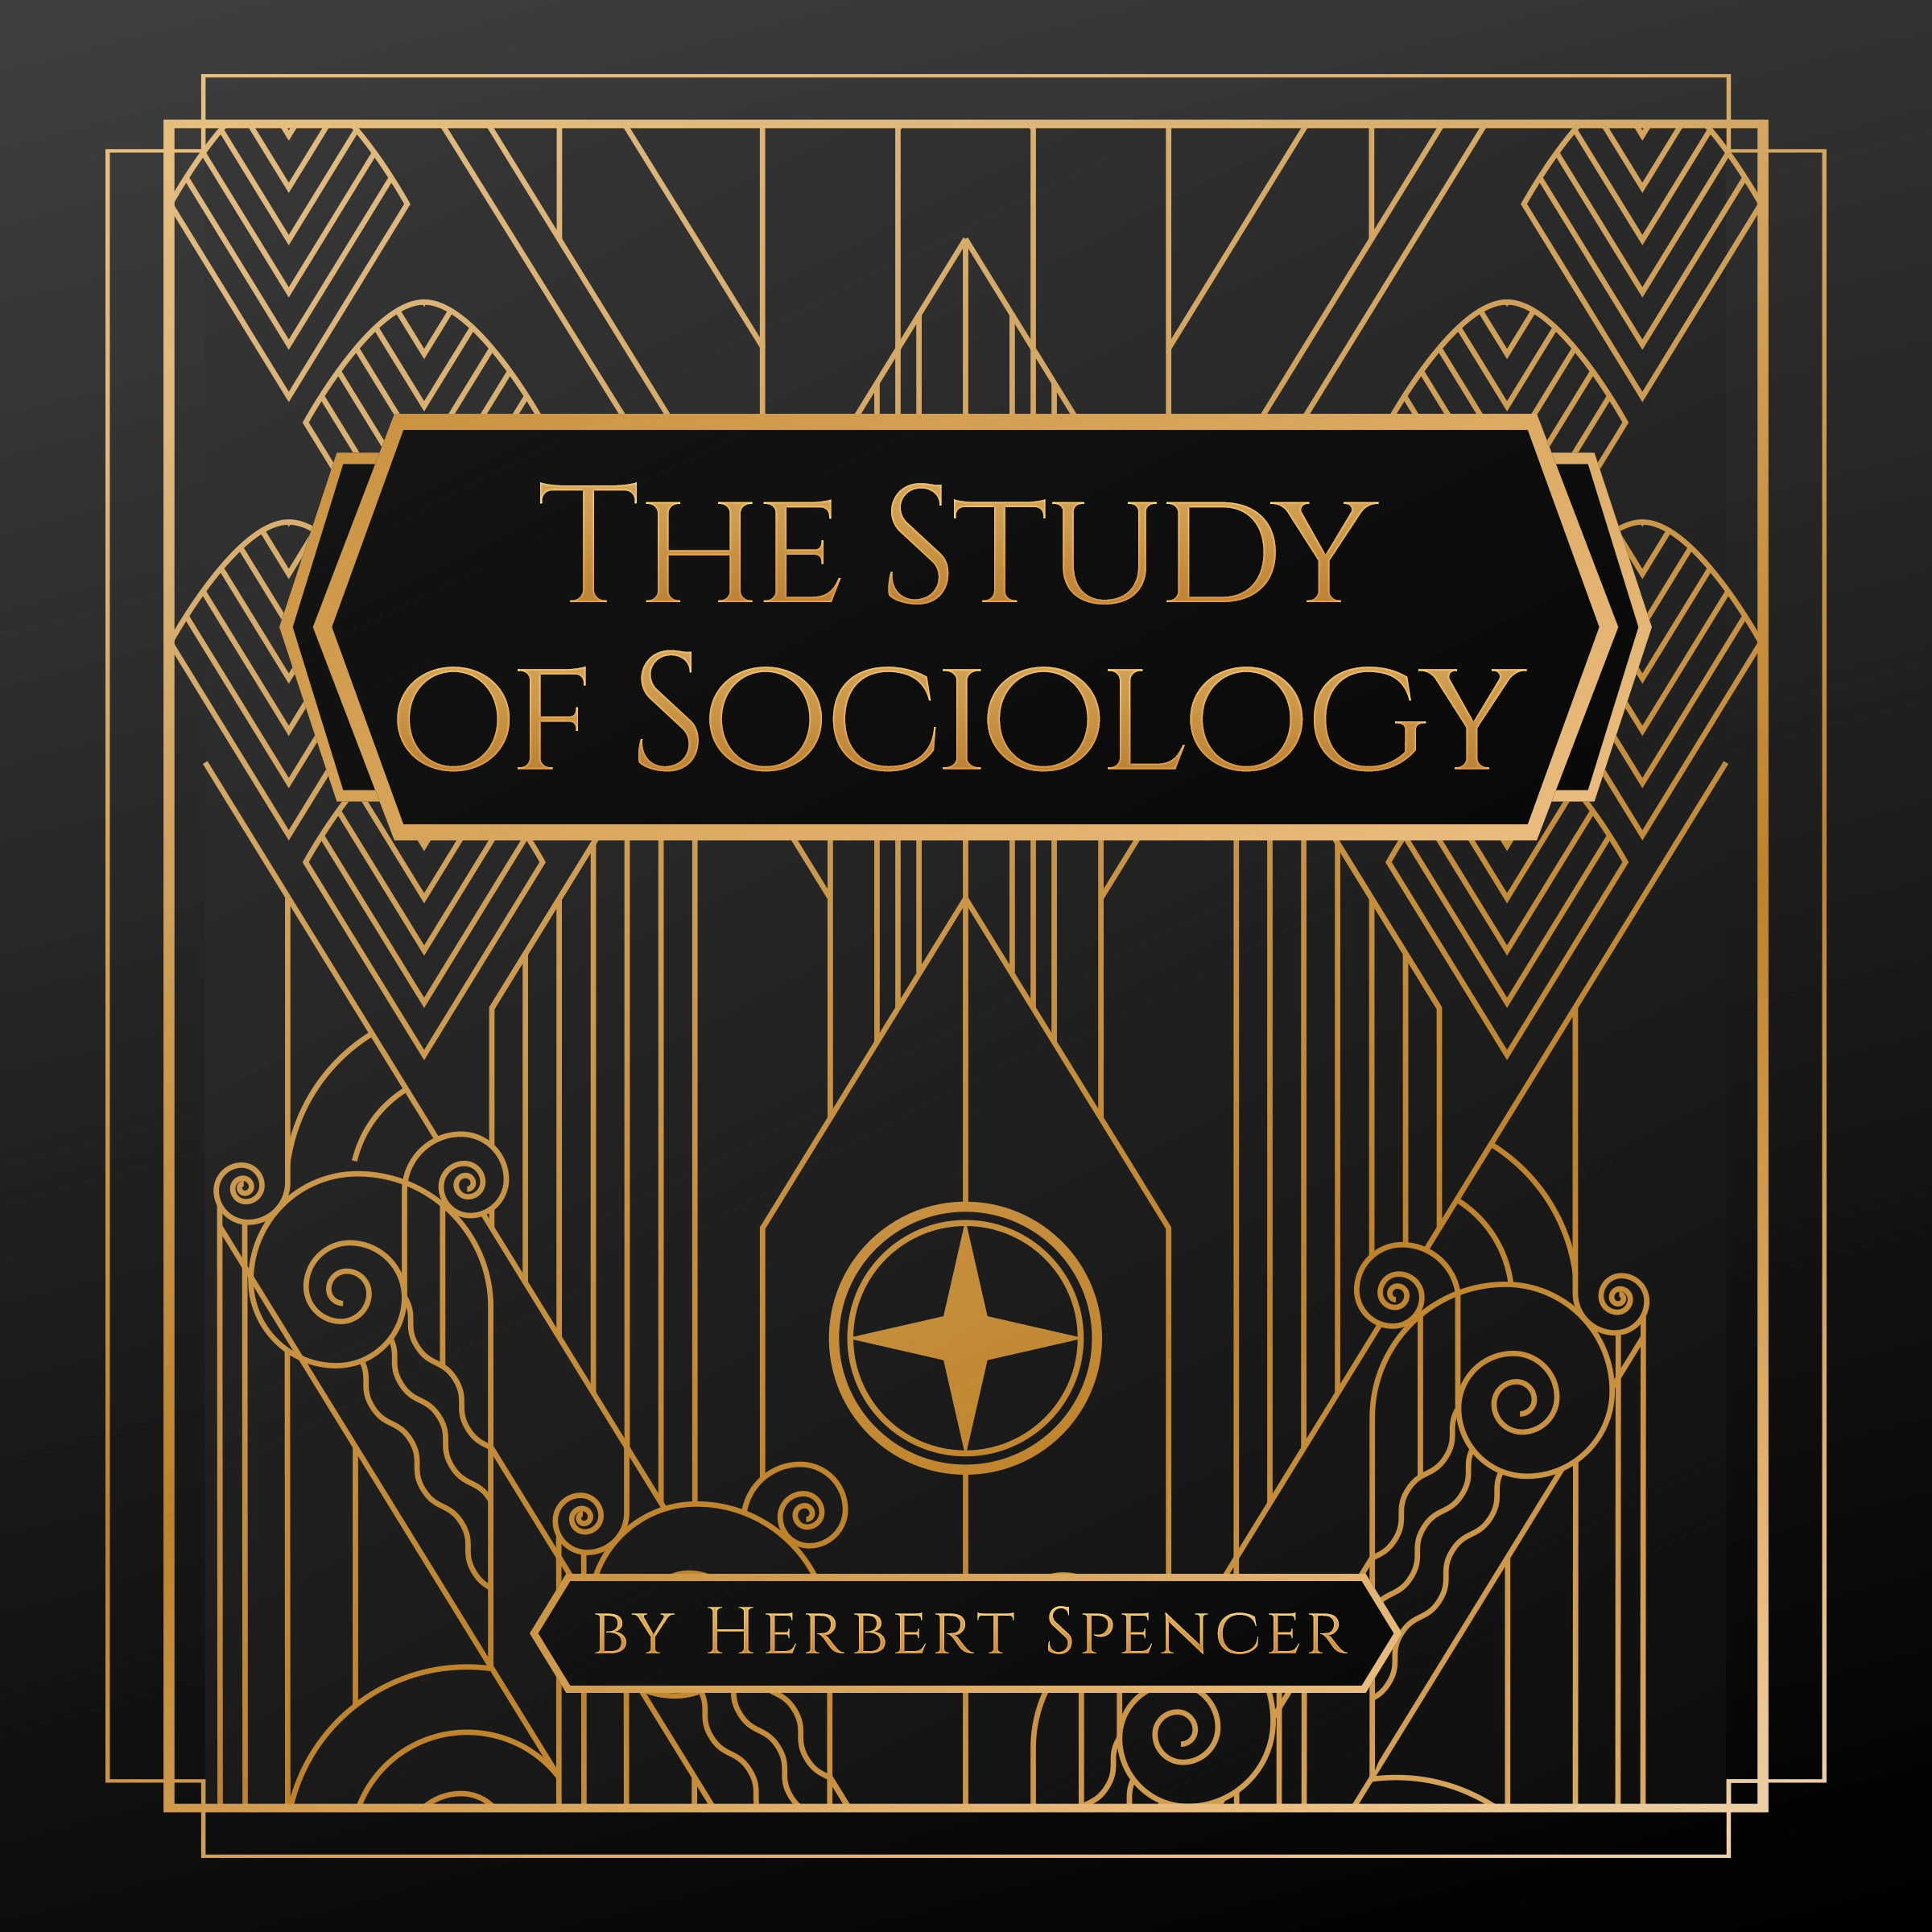 The Study of Sociology Audiobook by Herbert Spencer